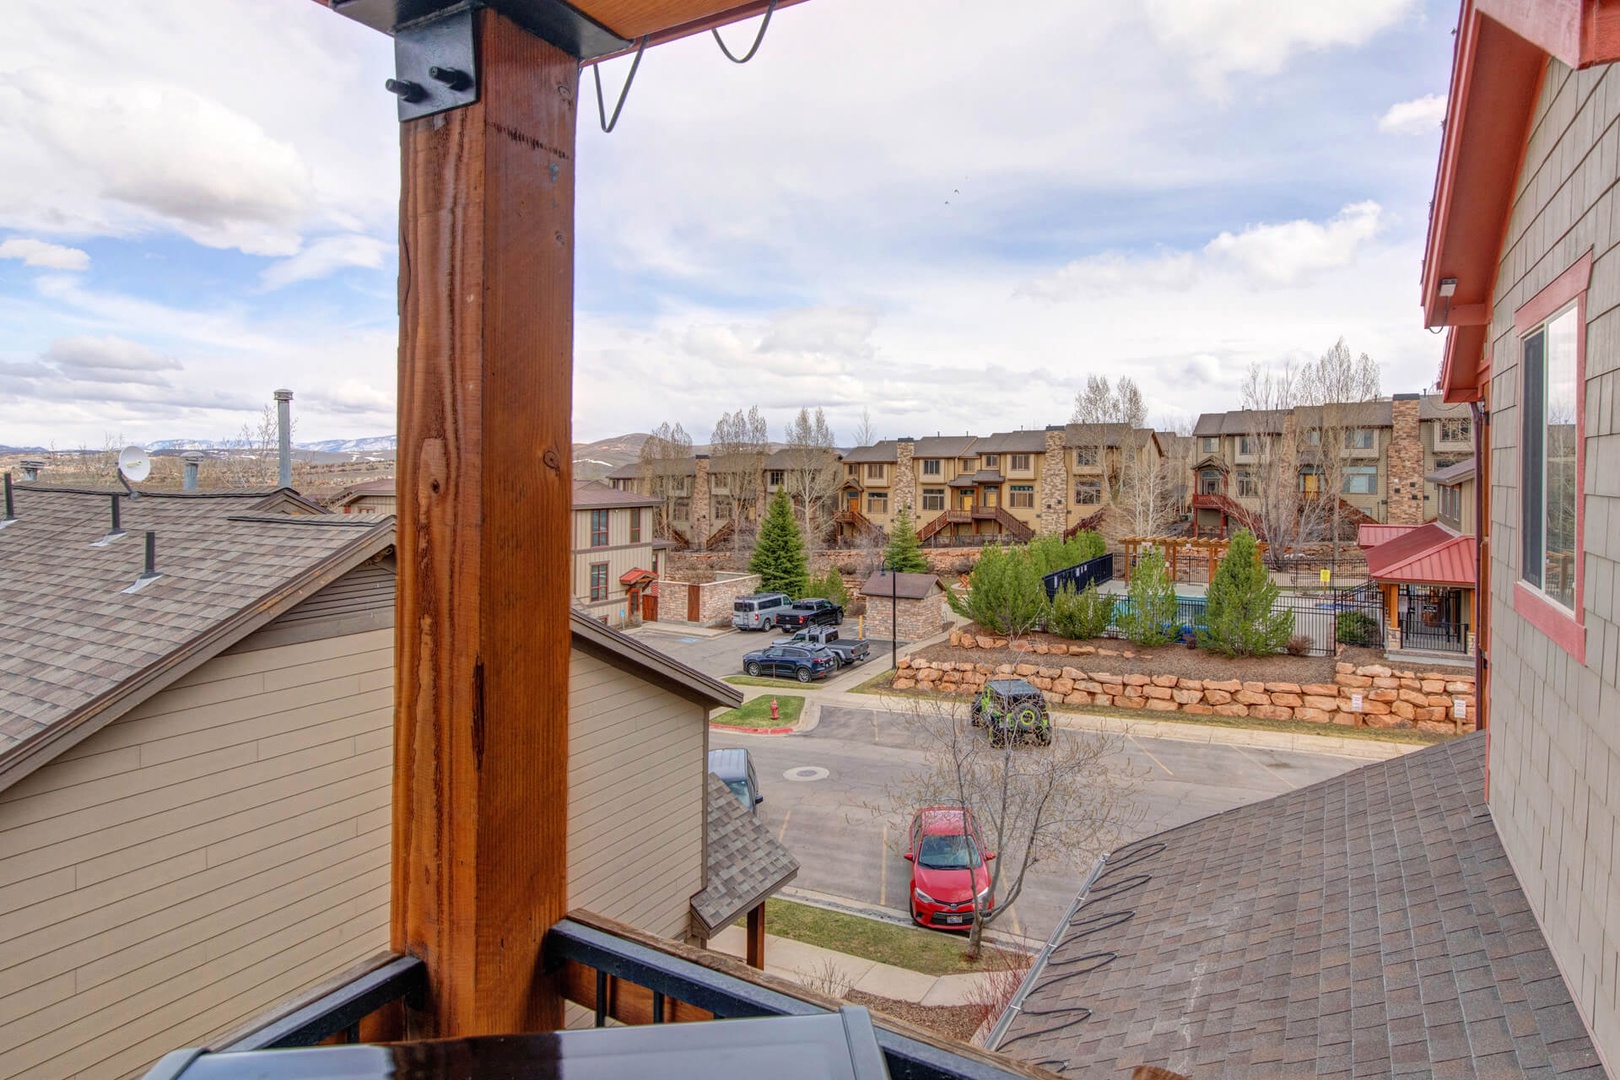 Bear Hollow Lodges 1313: This private third floor patio area gives opportunity to breath in the mountain air.